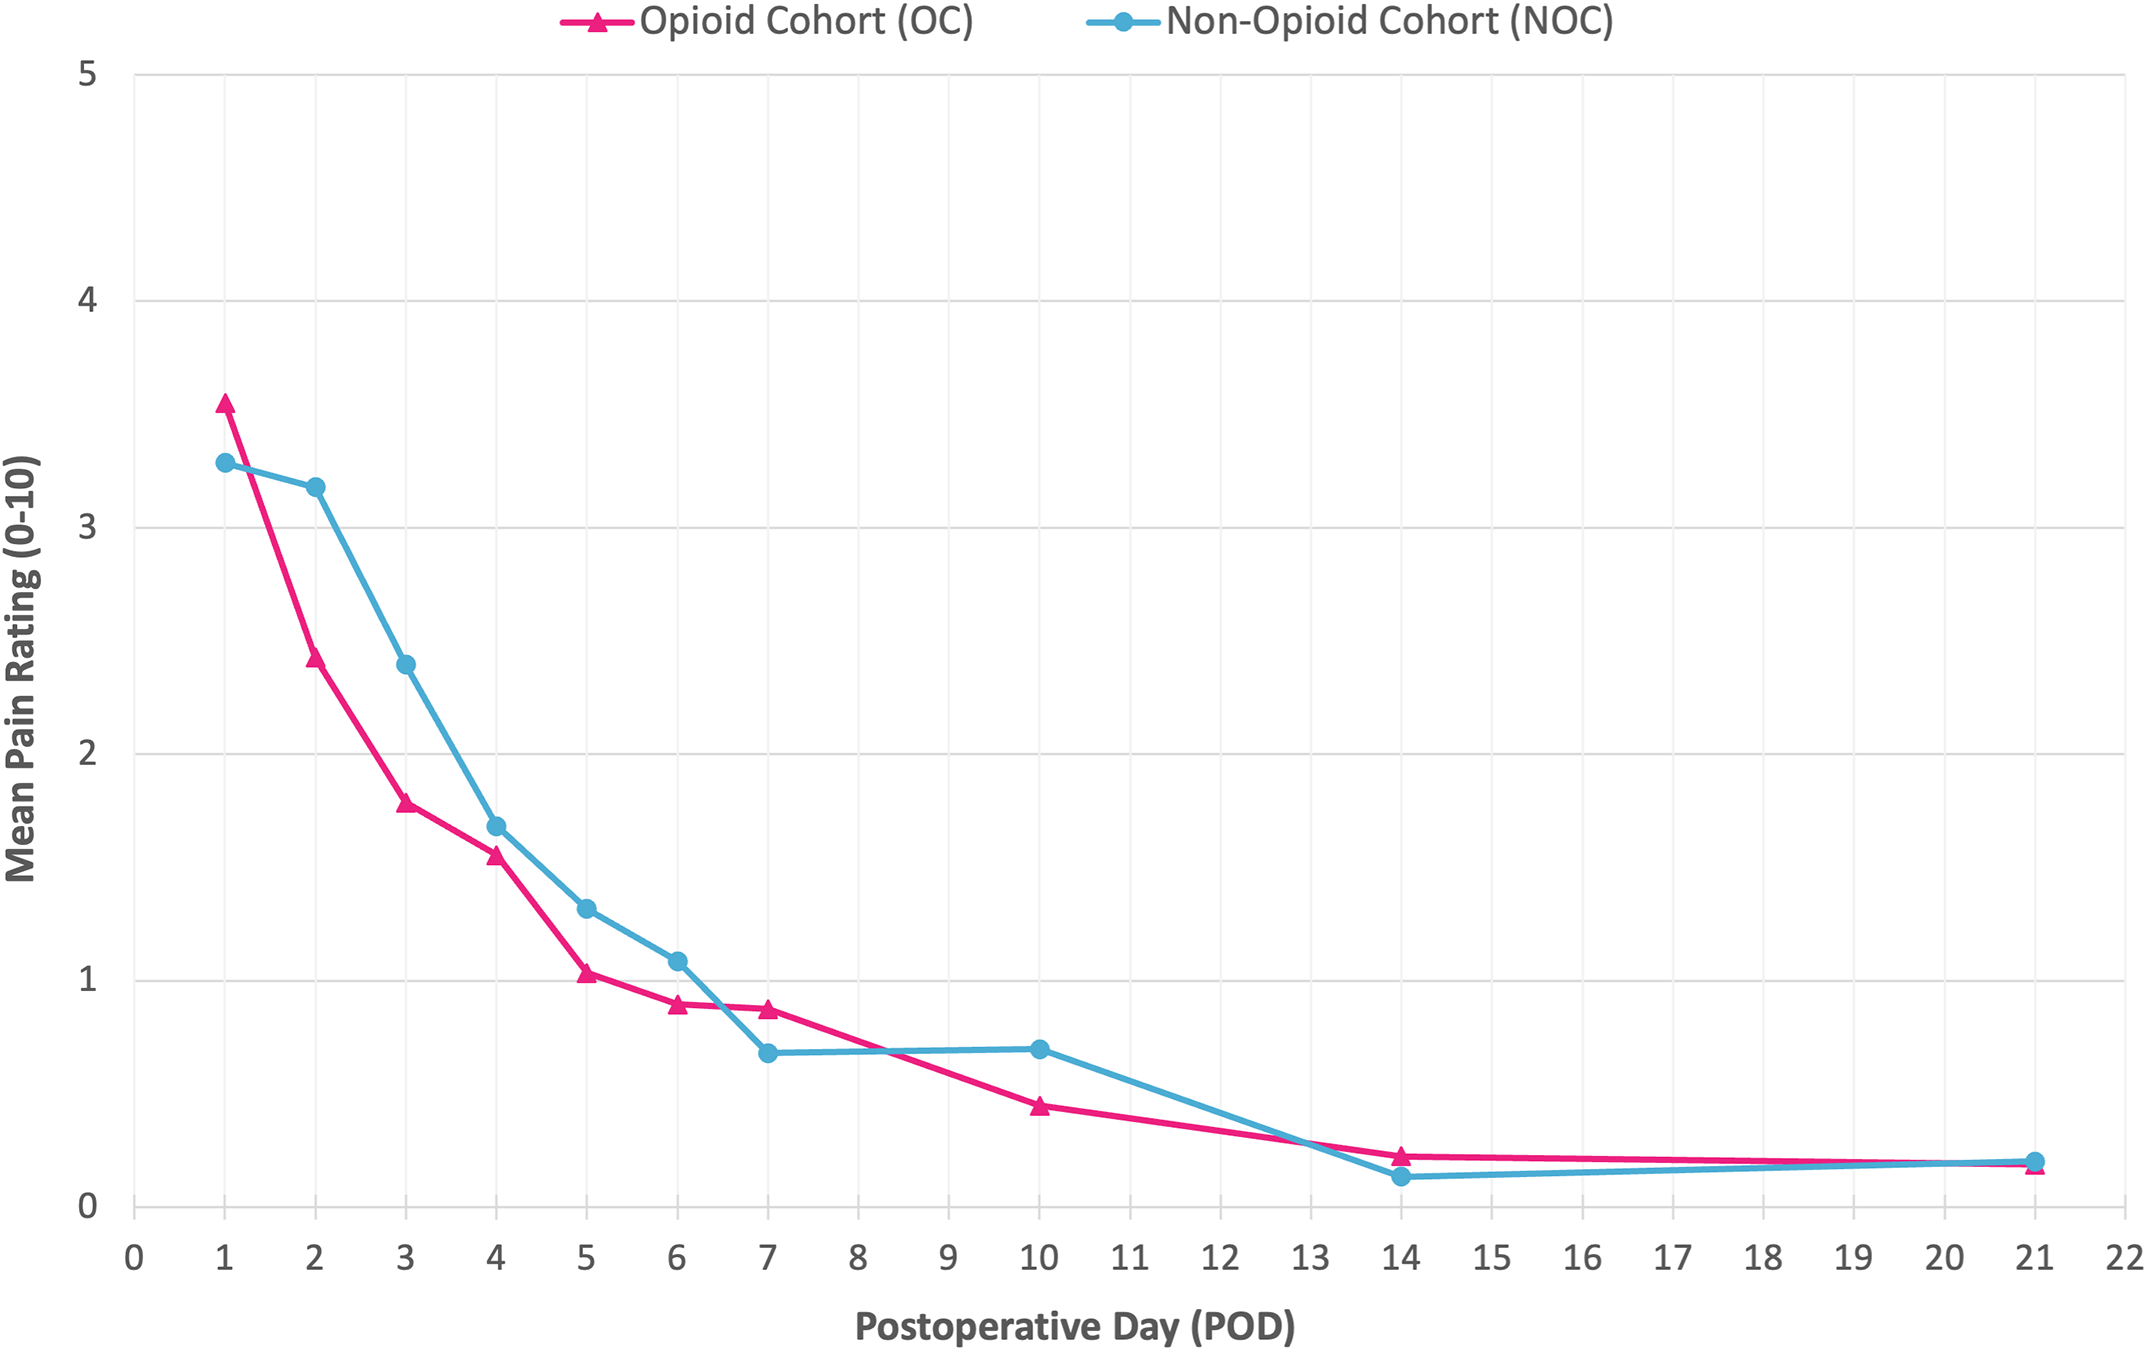 Line graph of mean daily pain ratings in the non-opioid cohort and the opioid cohort.